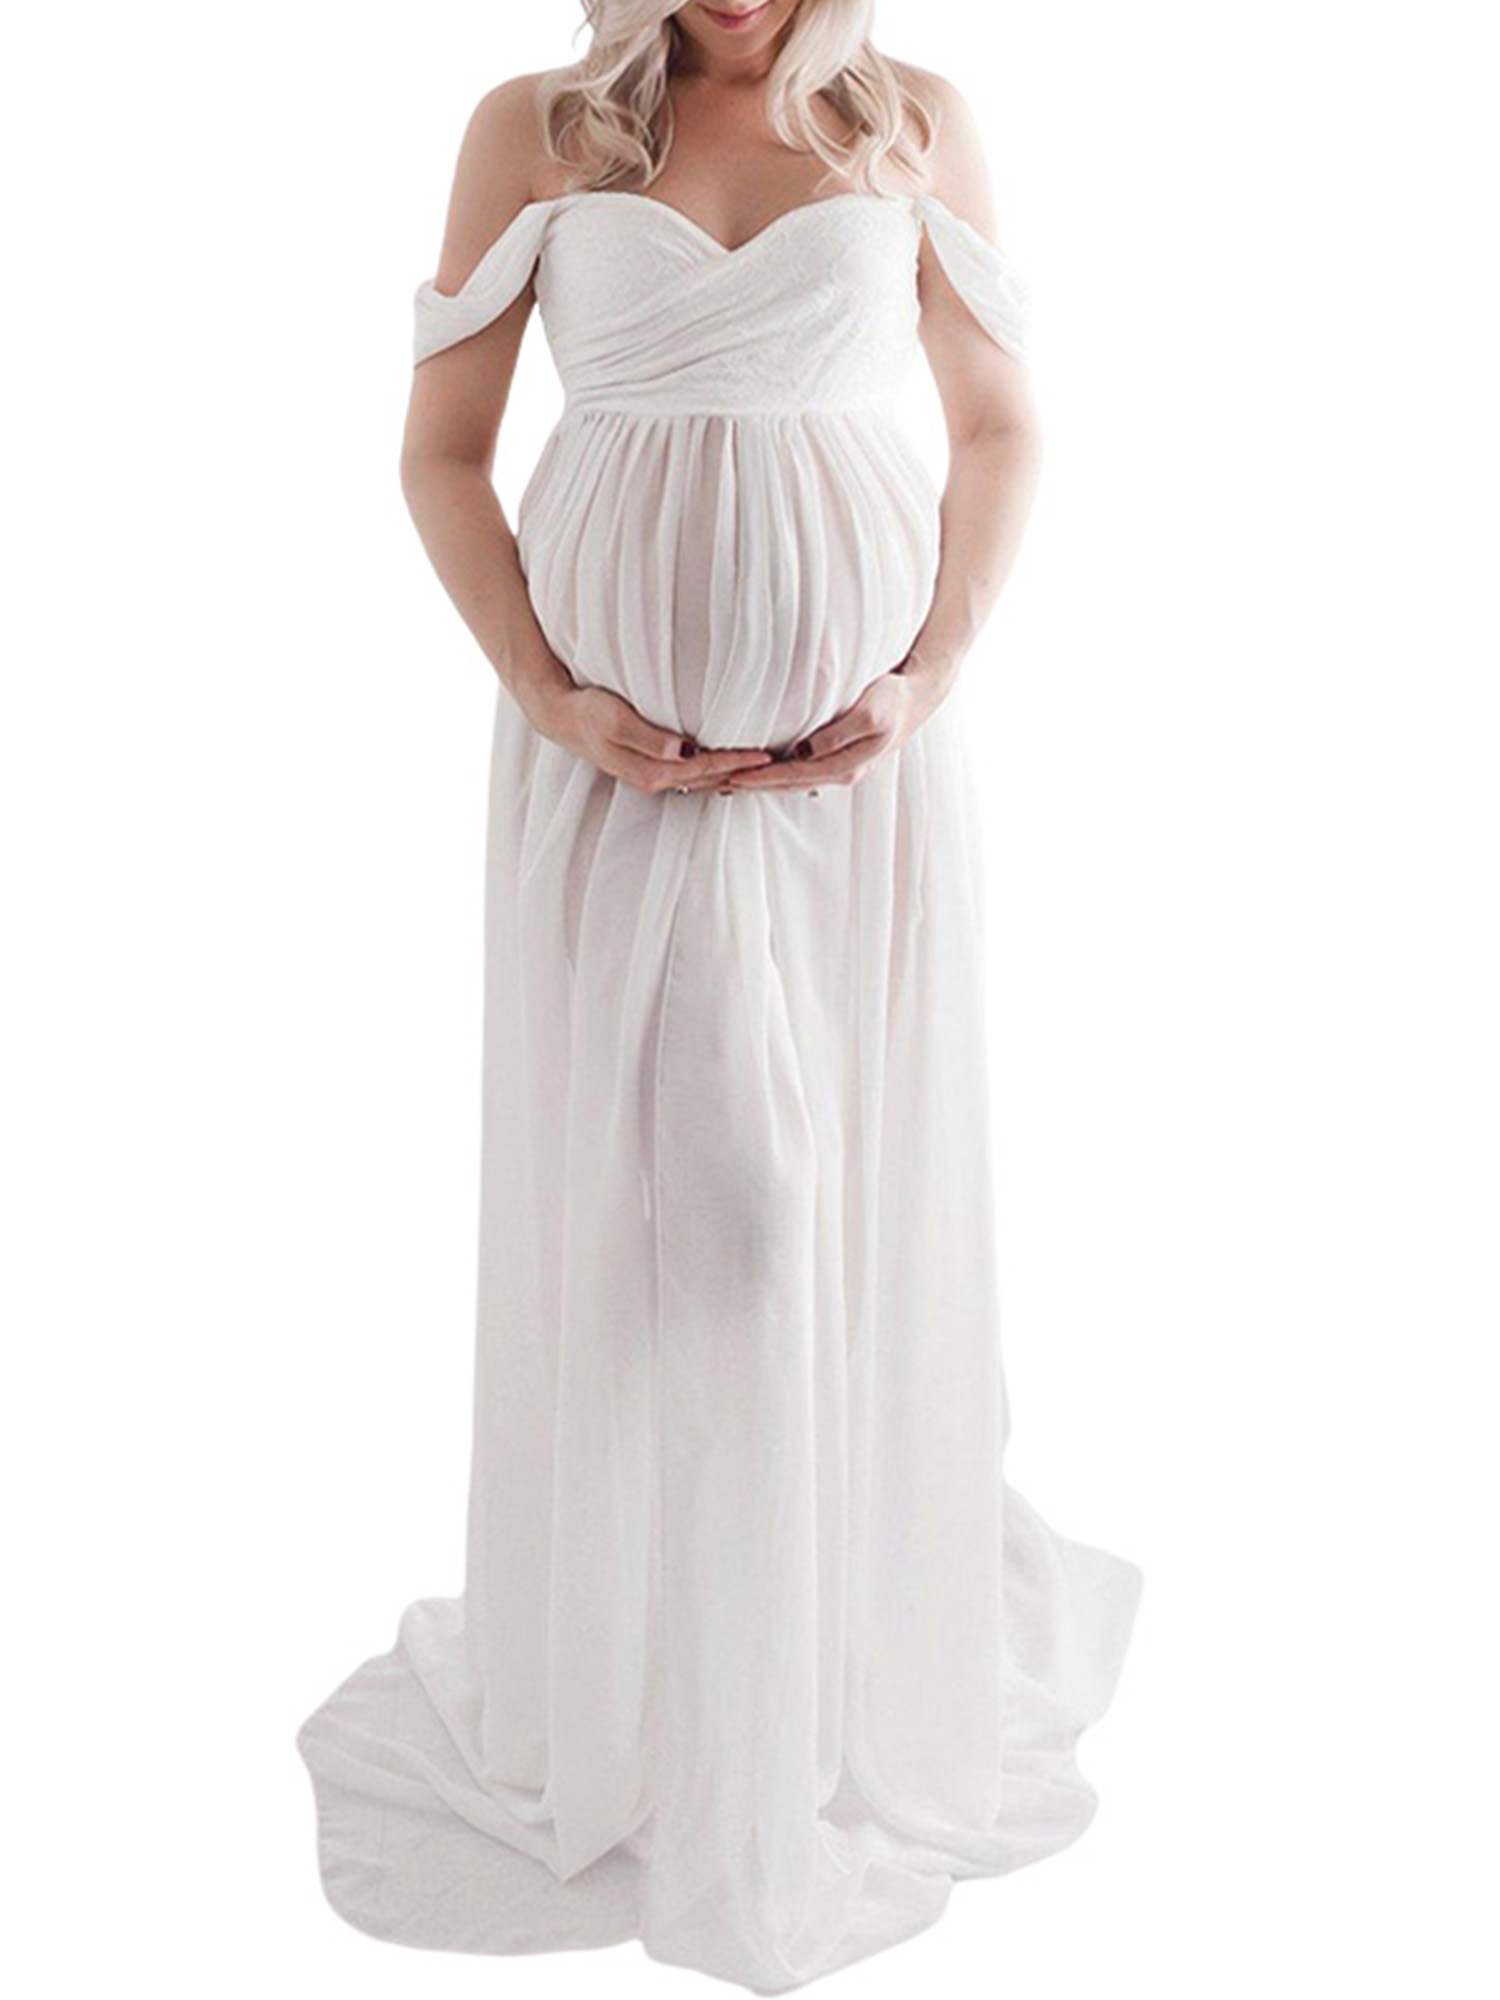 23 Best Maternity Photoshoot Dresses in 2022 | Well+Good